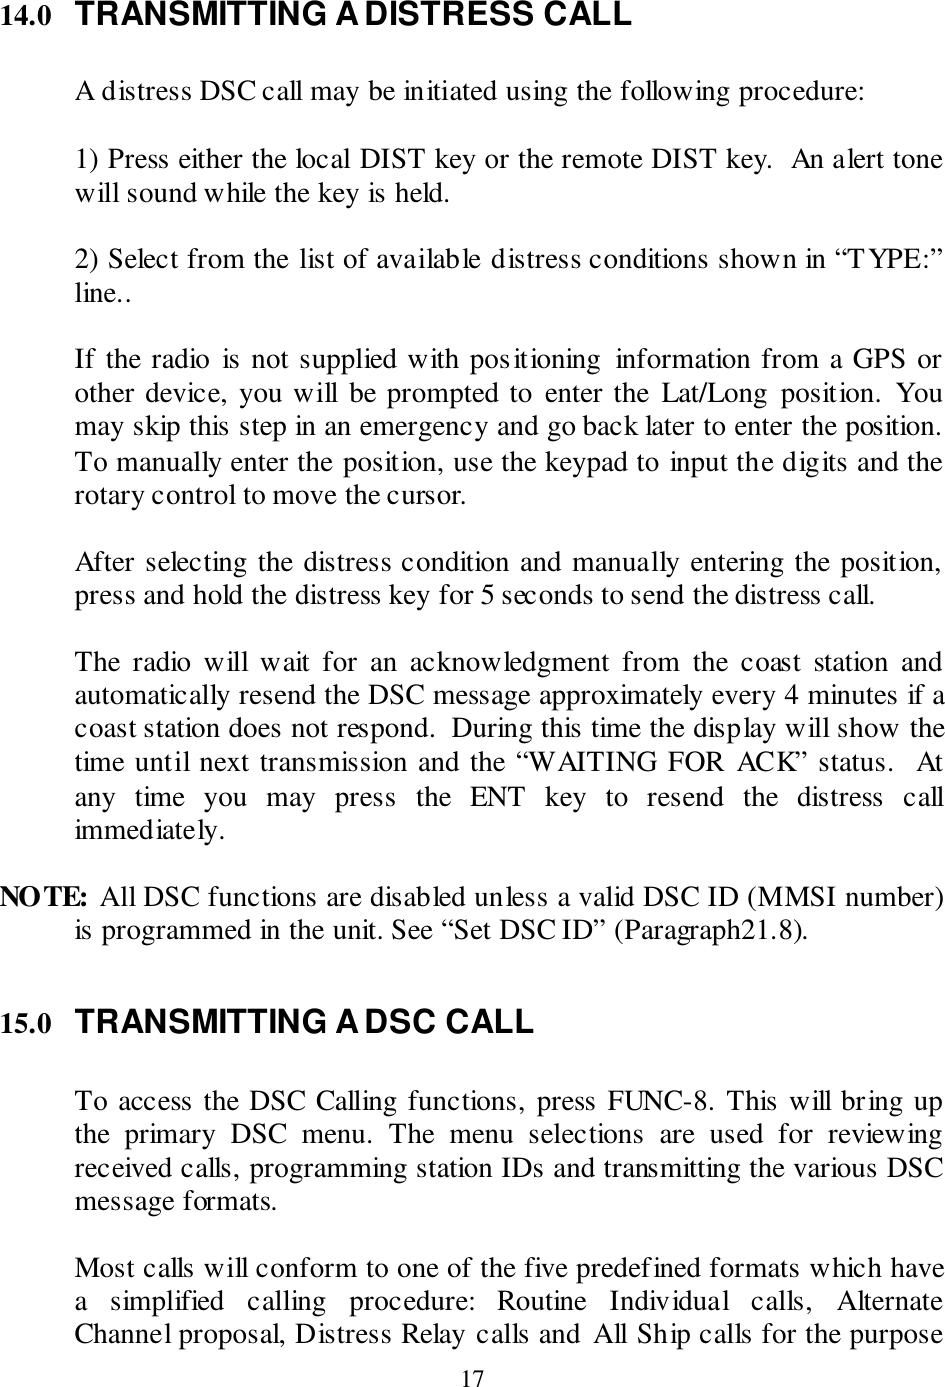  17 14.0 TRANSMITTING A DISTRESS CALL  A distress DSC call may be initiated using the following procedure:  1) Press either the local DIST key or the remote DIST key.  An alert tone will sound while the key is held.    2) Select from the list of available distress conditions shown in “TYPE:” line..  If the radio  is not supplied with positioning  information from a GPS or other device, you will be prompted to  enter the  Lat/Long position.  You may skip this step in an emergency and go back later to enter the position. To manually enter the position, use the keypad to input the digits and the rotary control to move the cursor.  After selecting the distress condition and manually entering the position, press and hold the distress key for 5 seconds to send the distress call.                                                 The  radio  will  wait  for  an  acknowledgment  from  the  coast  station  and automatically resend the DSC message approximately every 4 minutes if a coast station does not respond.  During this time the display will show the time until next transmission and the “WAITING FOR  ACK” status.  At any  time  you  may  press  the  ENT  key  to  resend  the  distress  call immediately.    NOTE: All DSC functions are disabled unless a valid DSC ID (MMSI number) is programmed in the unit. See “Set DSC ID” (Paragraph21.8).  15.0 TRANSMITTING A DSC CALL  To access the DSC Calling functions, press FUNC-8. This will bring up the  primary  DSC  menu.  The  menu  selections  are  used  for  reviewing received calls, programming station IDs and transmitting the various DSC message formats.    Most calls will conform to one of the five predefined formats which have a  simplified  calling  procedure:  Routine  Individual  calls,  Alternate Channel proposal, Distress Relay calls and All Ship calls for the purpose 